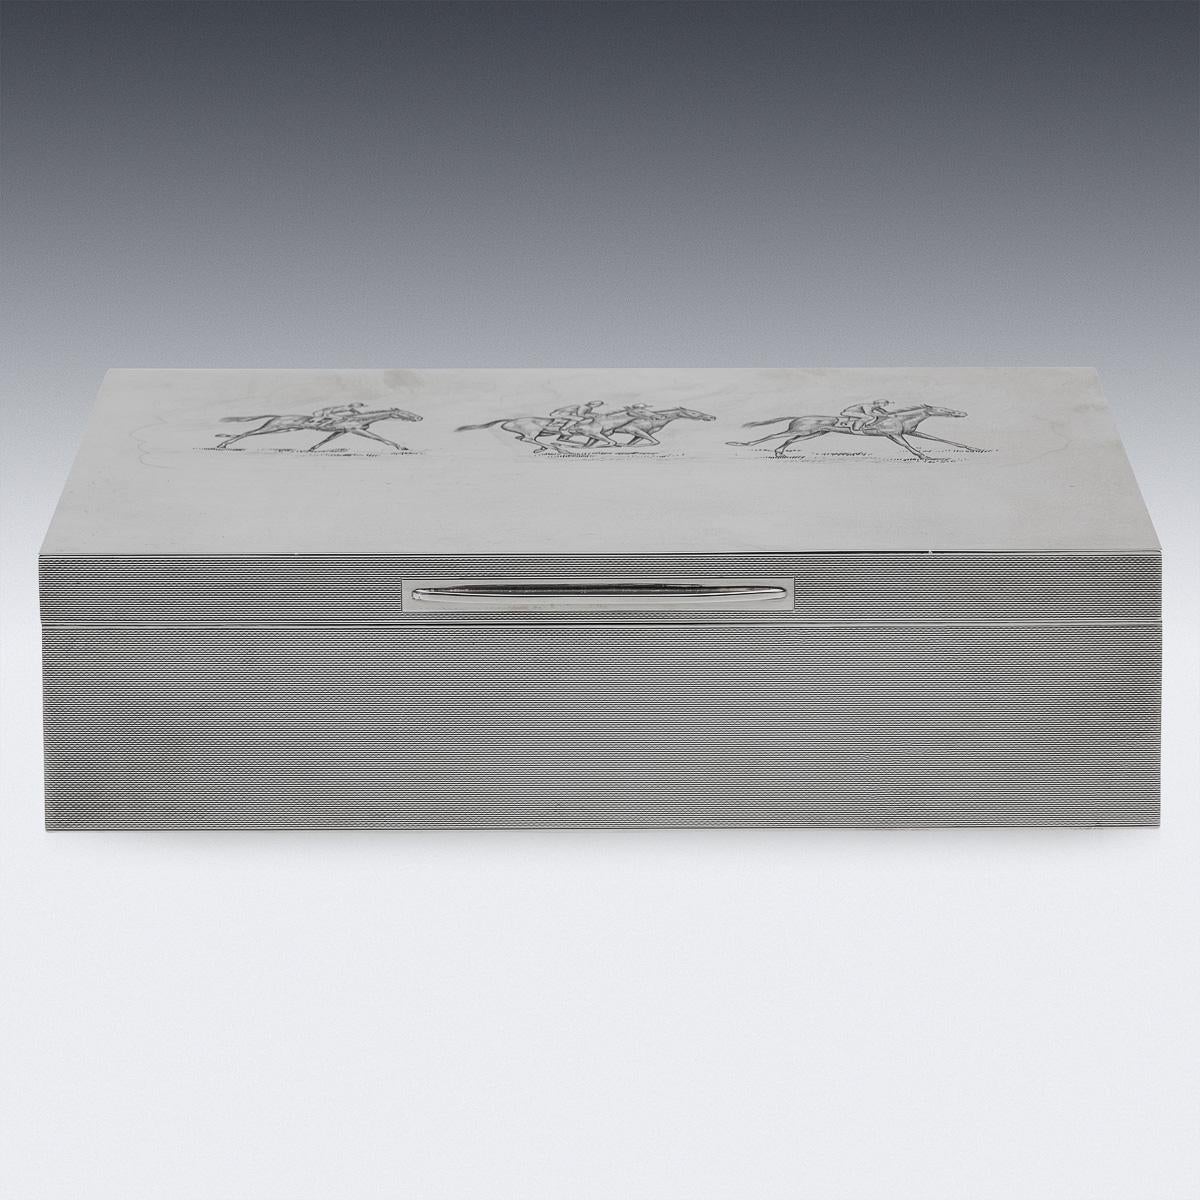 Stylish 20th Century simple and elegant box with a multitude of uses, currently perfect for storing cigarettes or cigars but equally adept at storing jewellery or trinkets. The solid silver body is engraved with racing horses and finshed in all-over